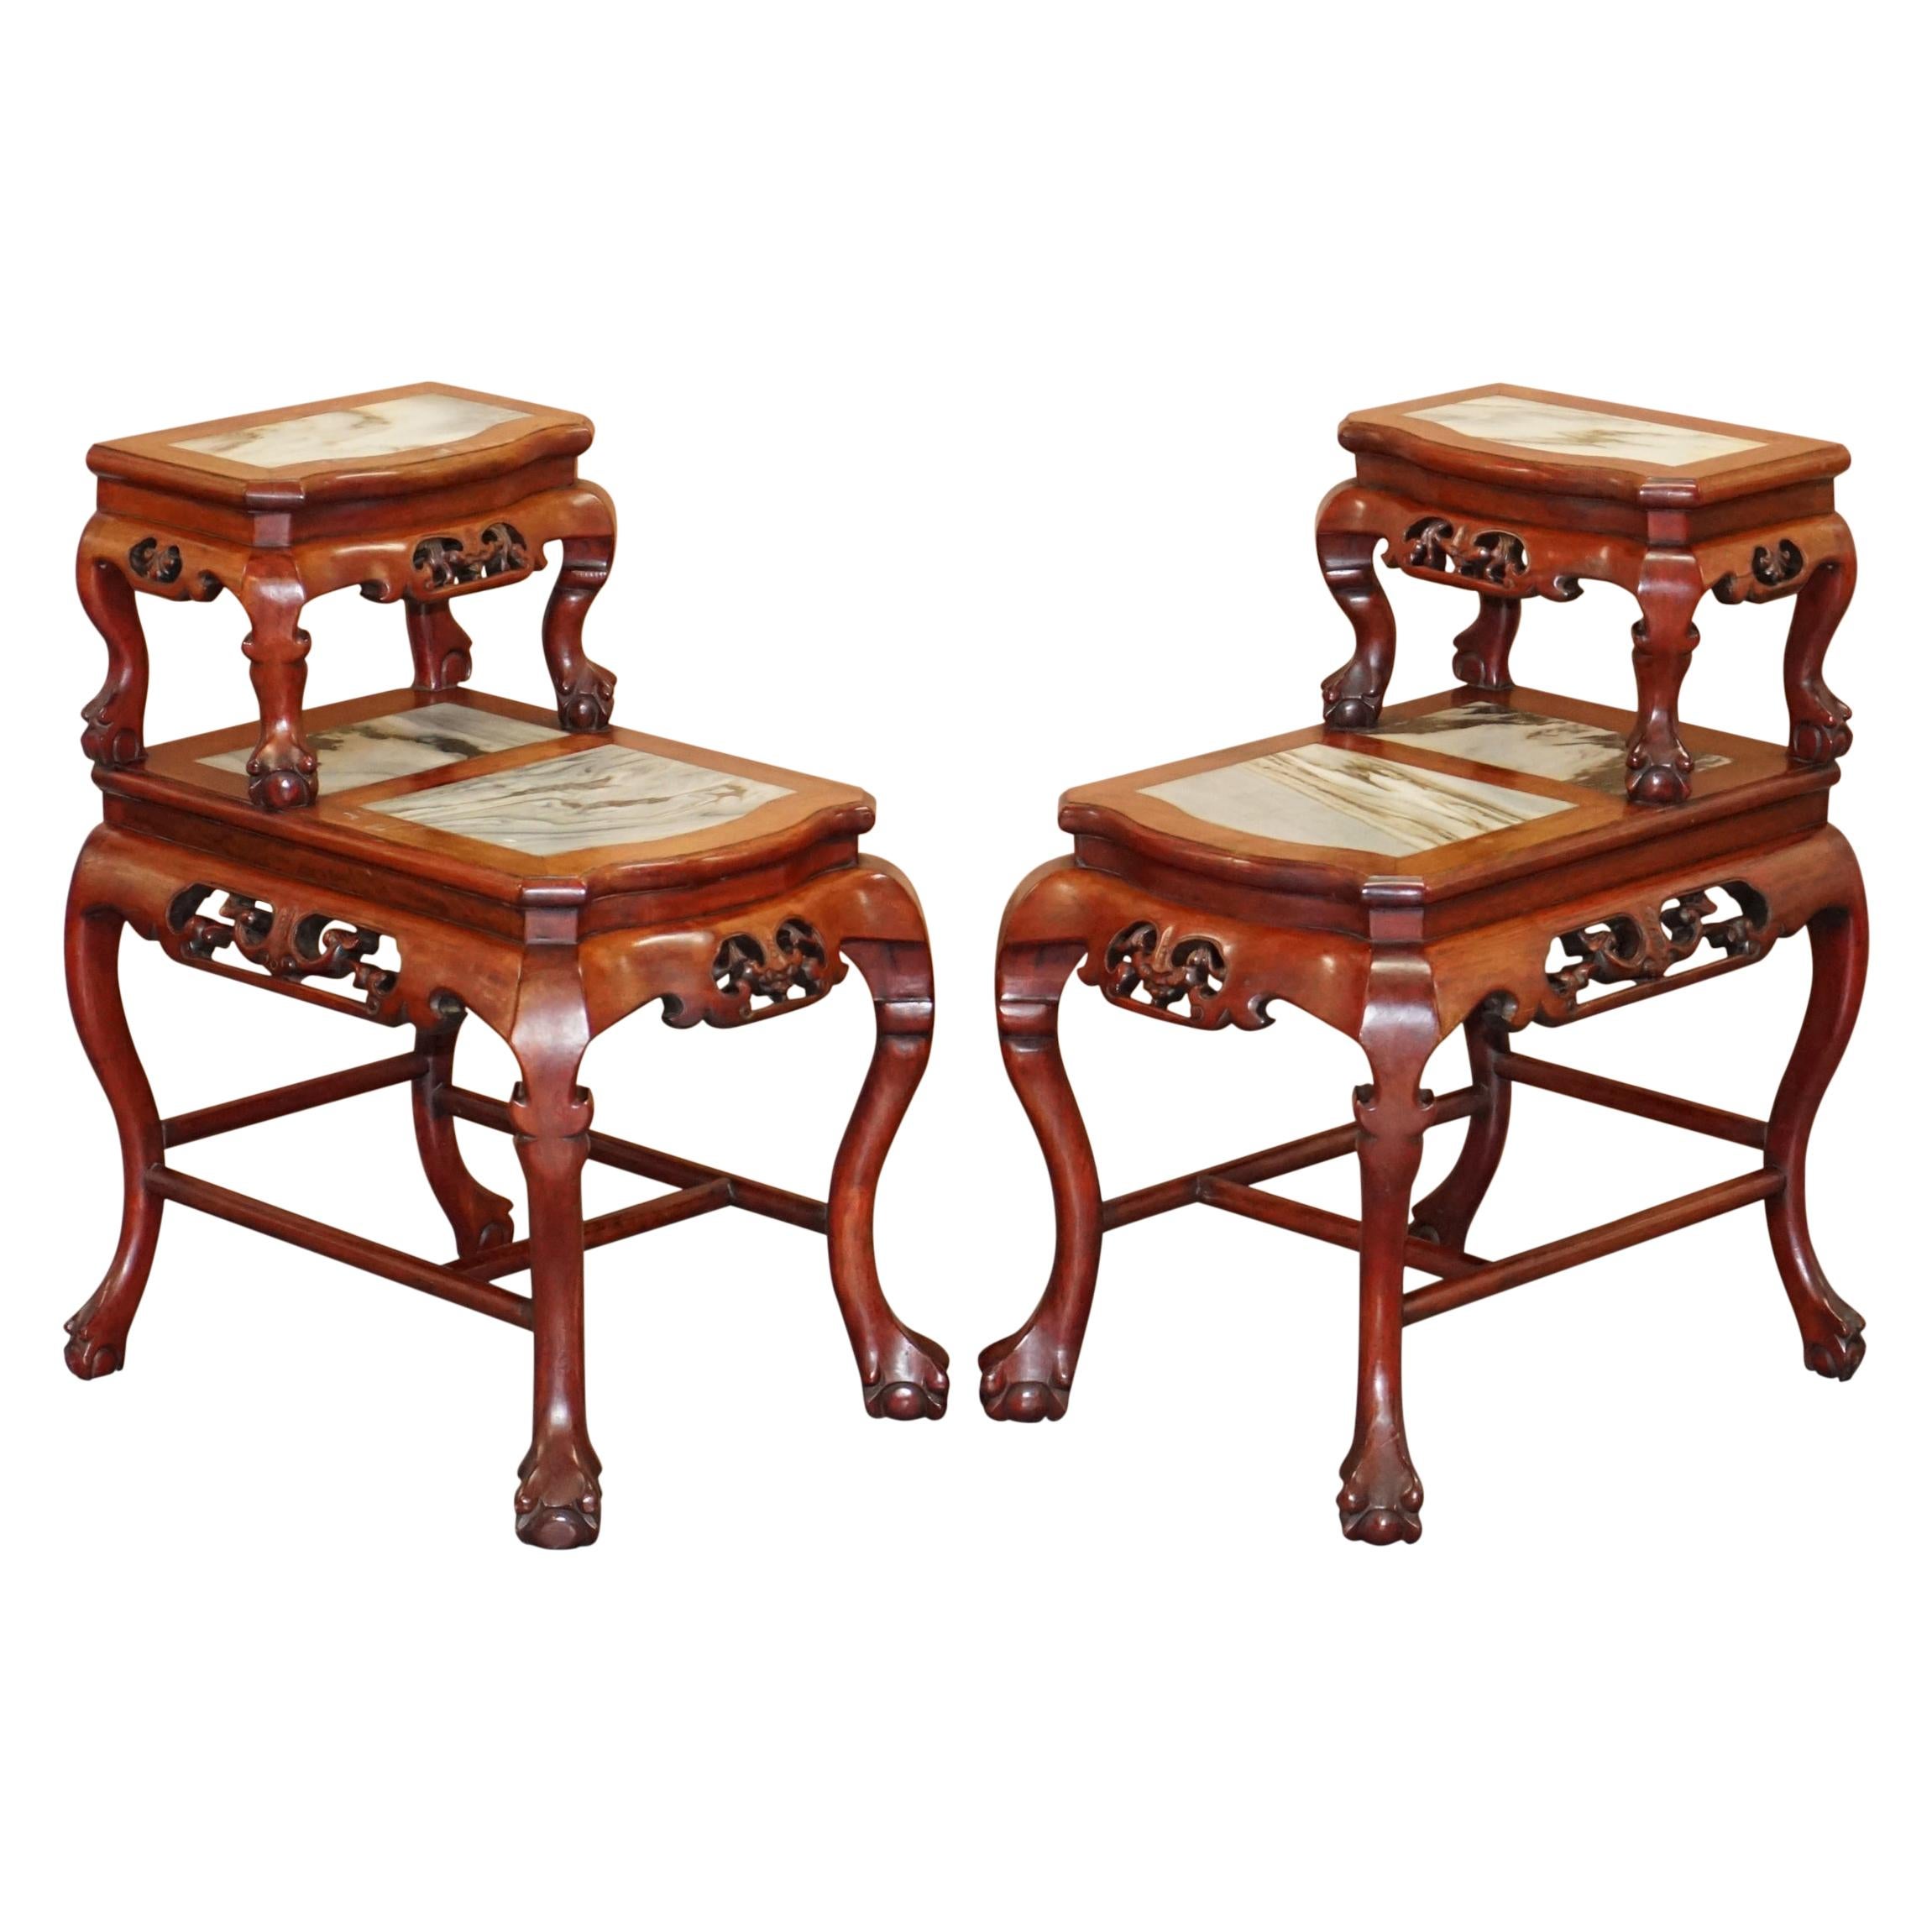 Pair of Chinese Hand Carved Hardwood Marble Side Tables with Claw and Ball Feet